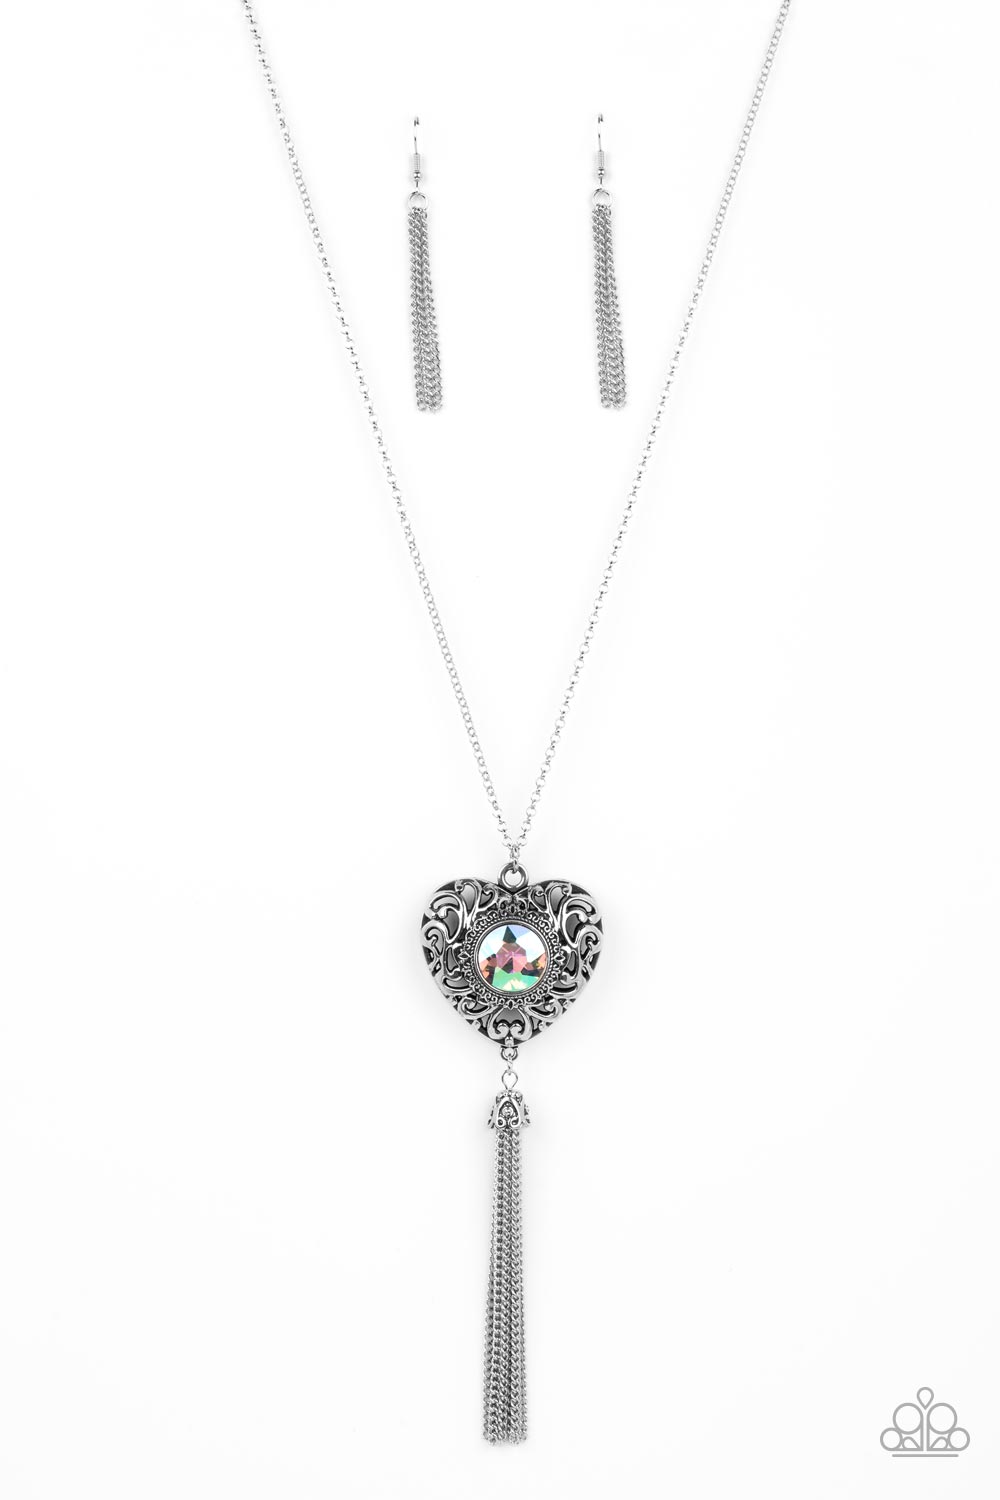 Prismatic Passion Green Necklace - Paparazzi Accessories  A magical iridescent green gem sparkles at the center of a 3-dimensional silver heart. Filled with vine-like filigree, the locket-inspired heart pendant glides along an extended silver chain while a shimmery tassel of silver chain dances from the bottom for a flirtatious finish. Features an adjustable clasp closure. Due to its prismatic palette, color may vary.  Sold as one individual necklace. Includes one pair of matching earrings.